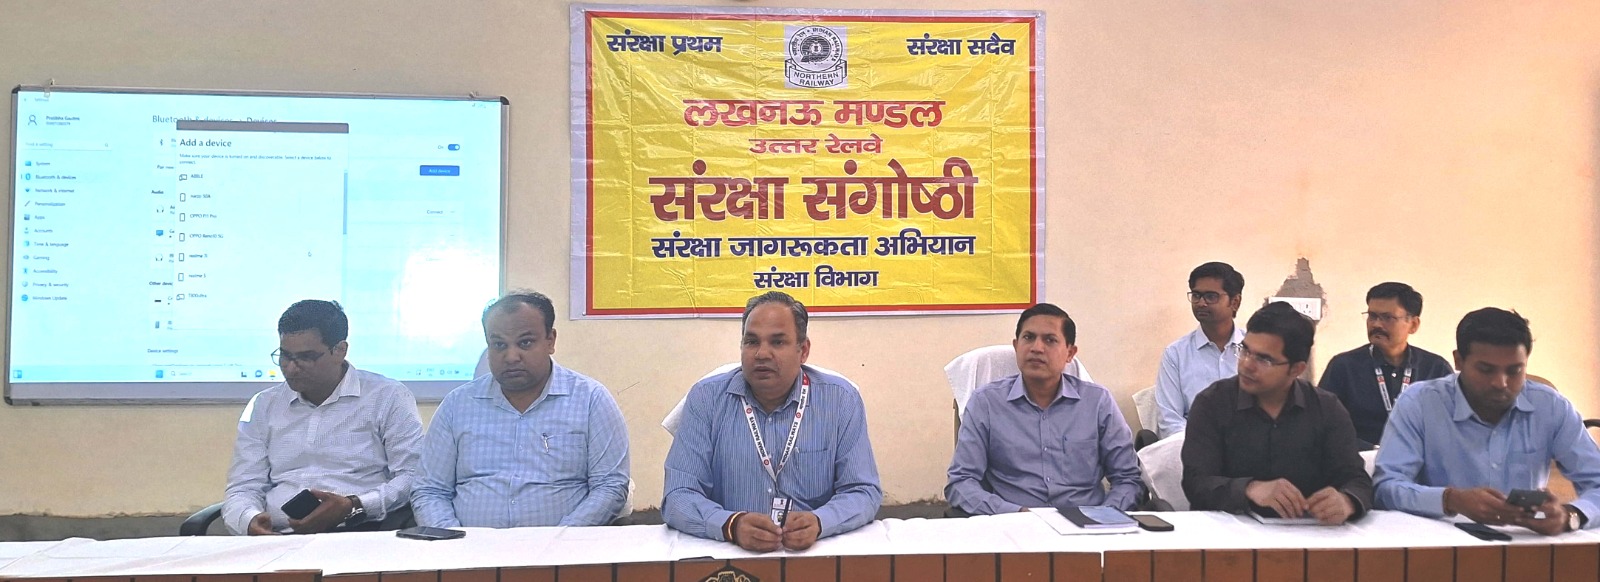 Safety seminar organized at the training center located in diesel shed, Lucknow